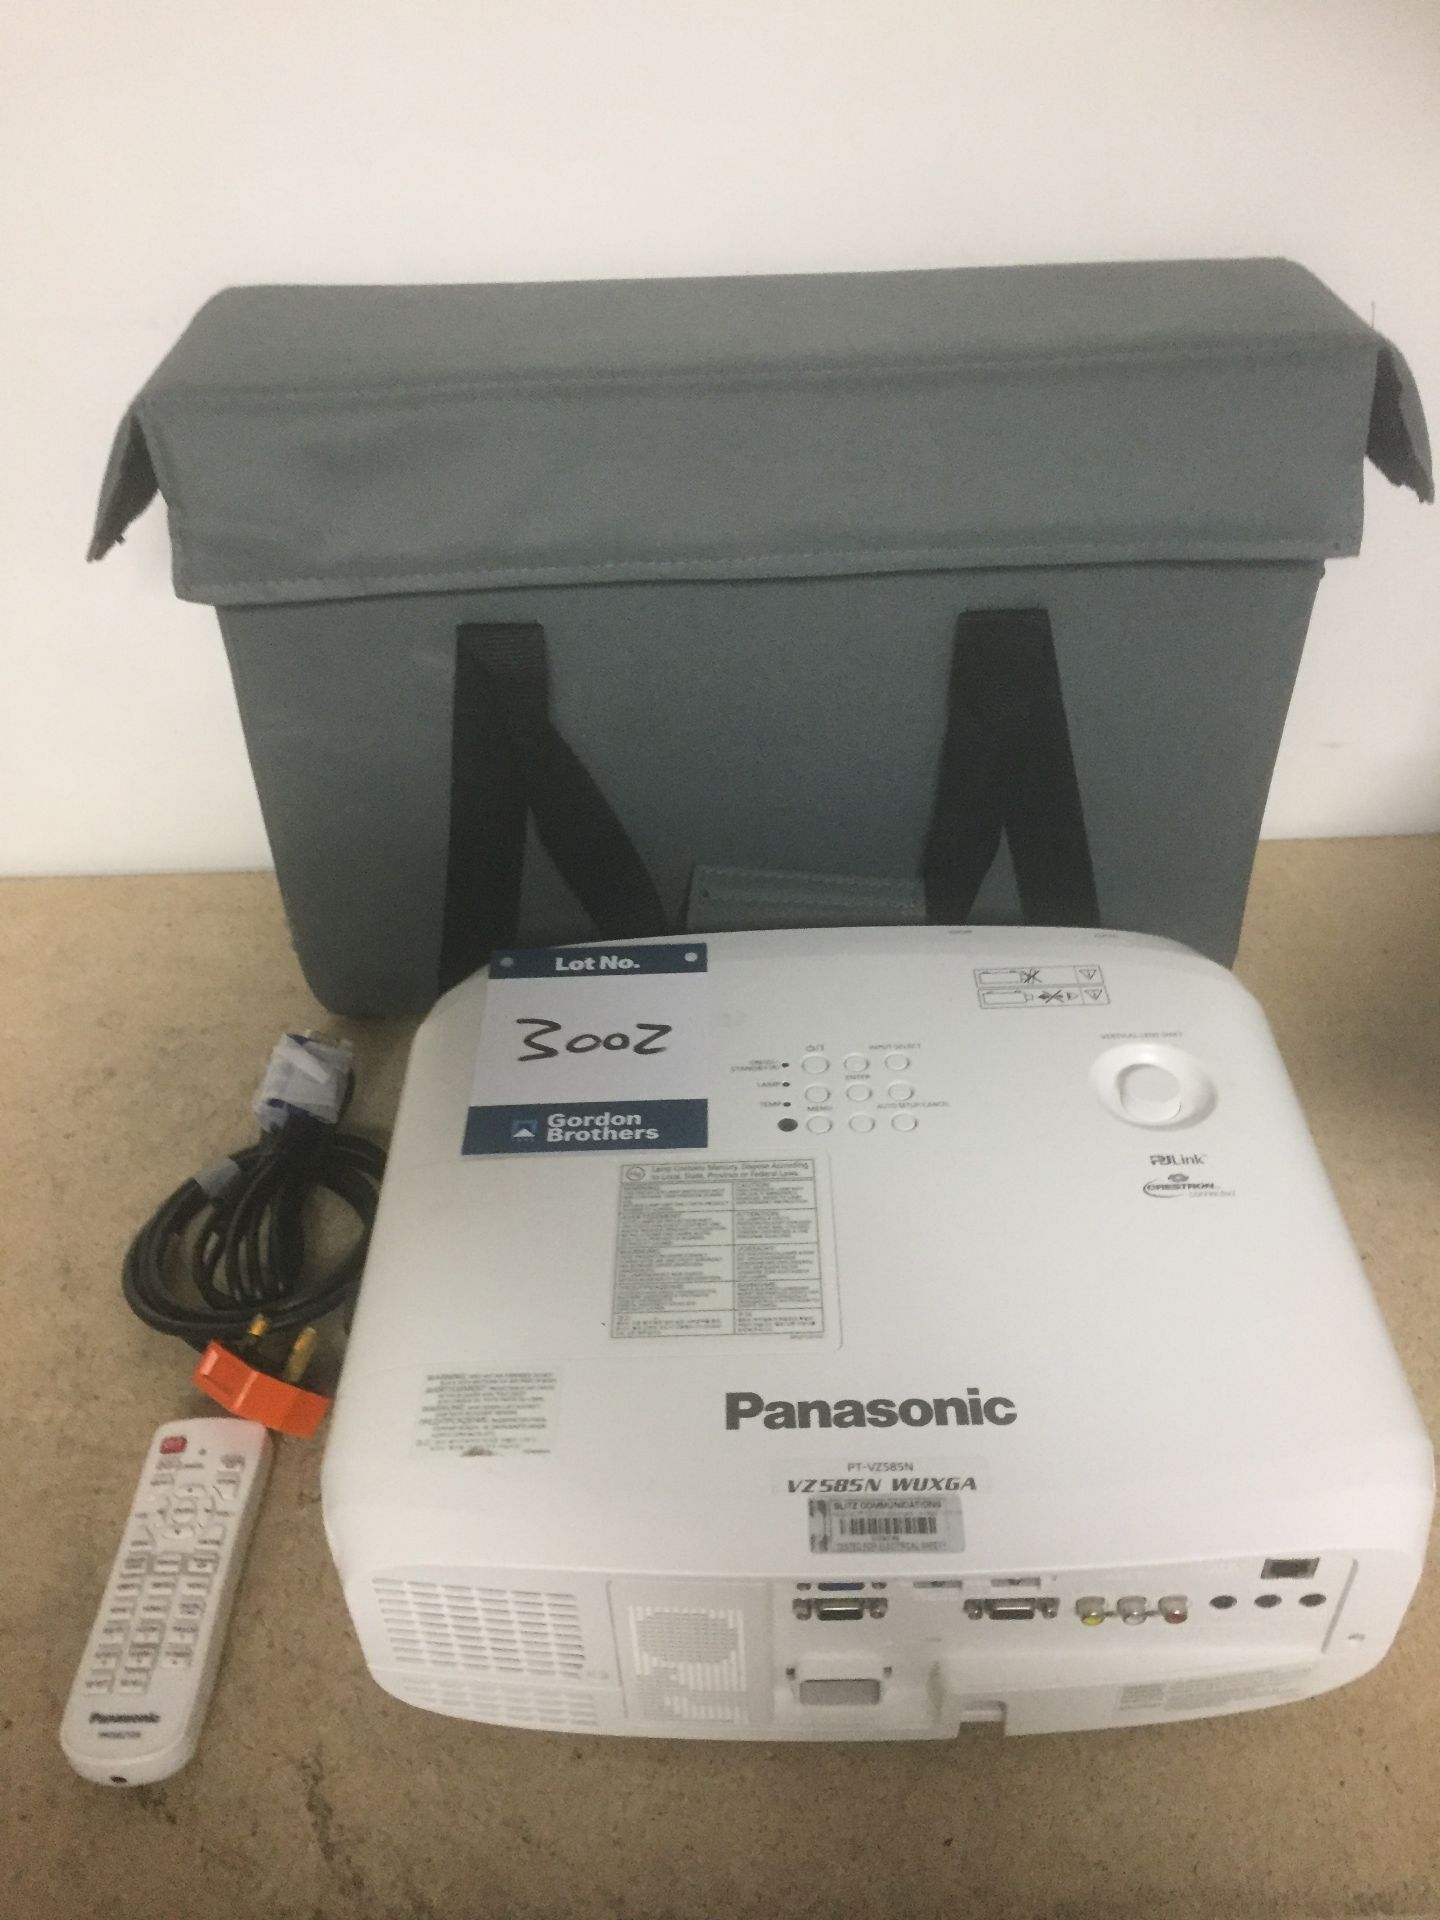 Panasonic PT-VZ585N WUXGA projector, including leads, remote and carry bag